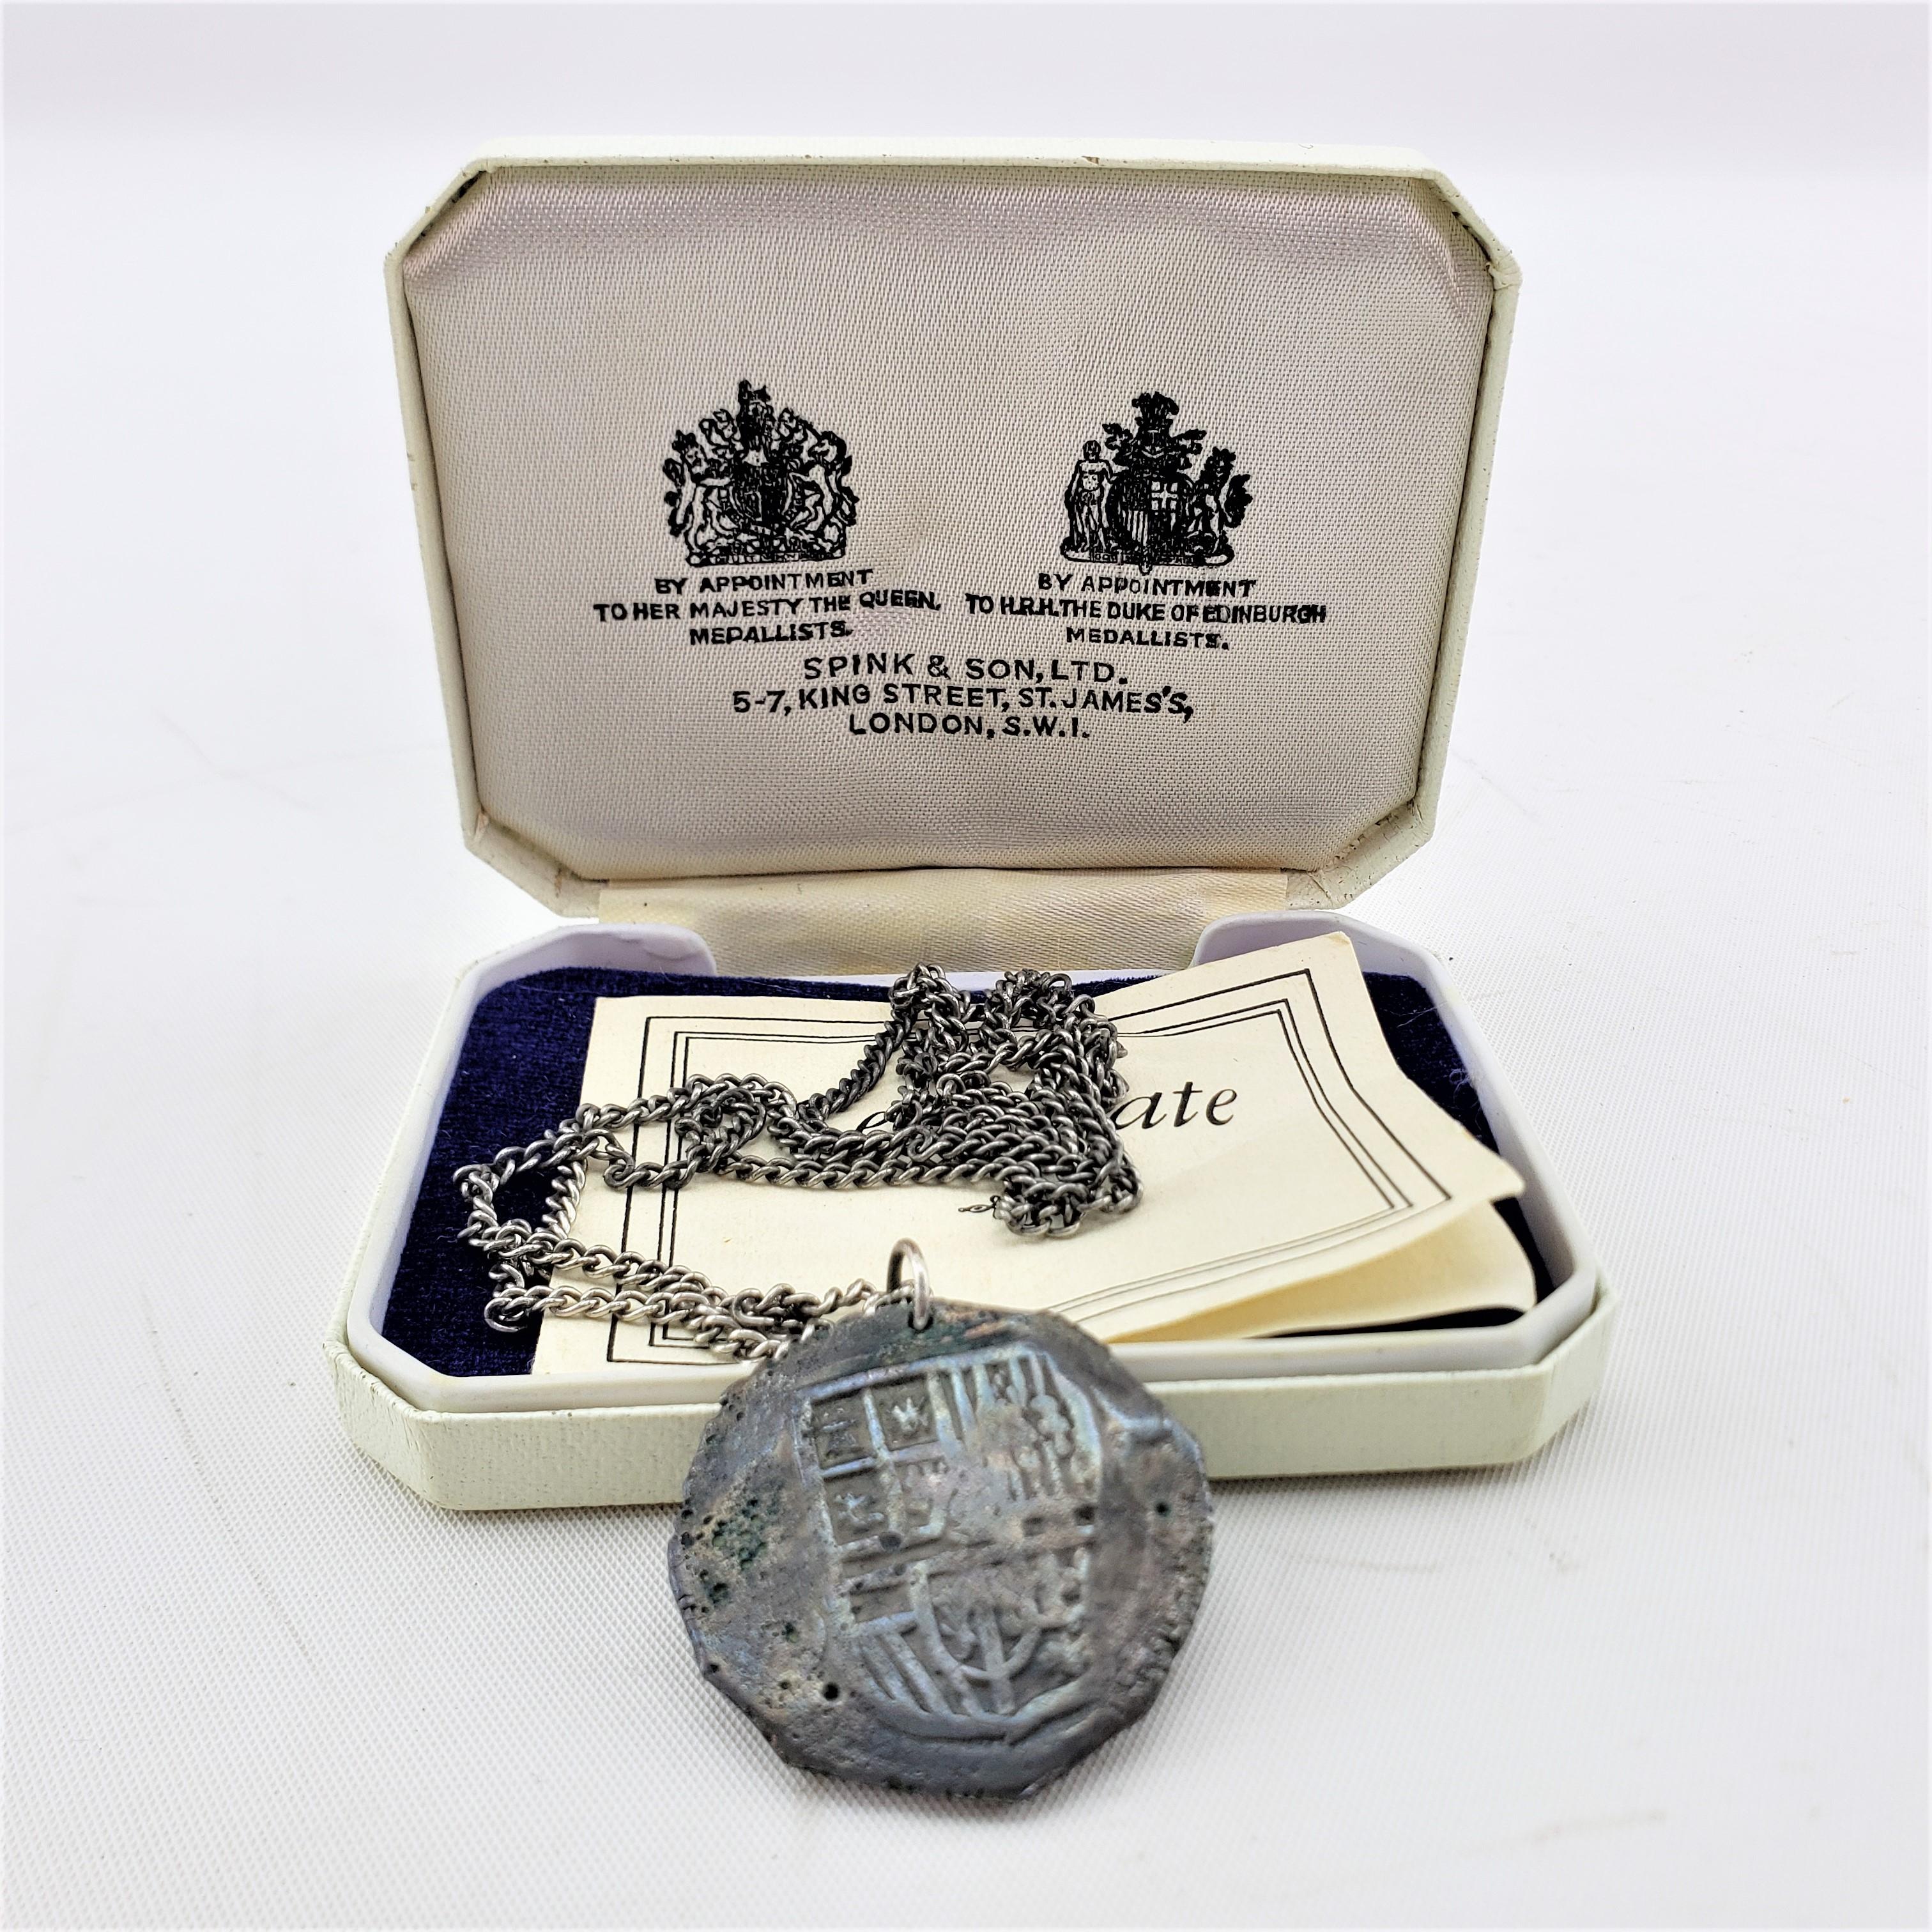 This antique coin came from the famous Lacayan Beach discovery of a hoard of Medieval Spanish coins dating to 1628. The coins or reales were marketed bySpink & Sons of England and come in a velvet lined box with a Certificate of Authenticity. This